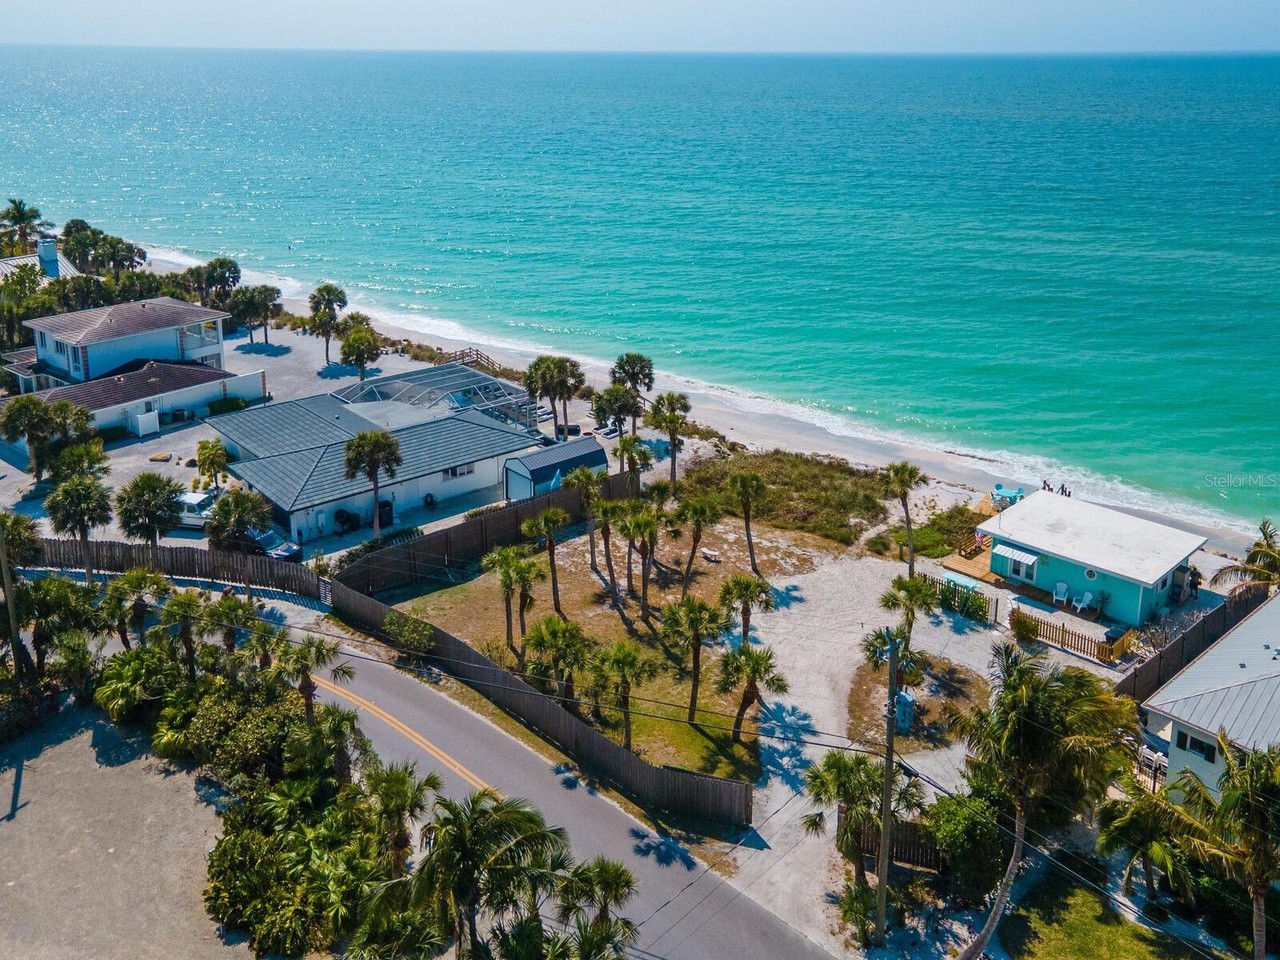 A nearly 500-square-foot beach house in Florida is on the market for $4.5 million